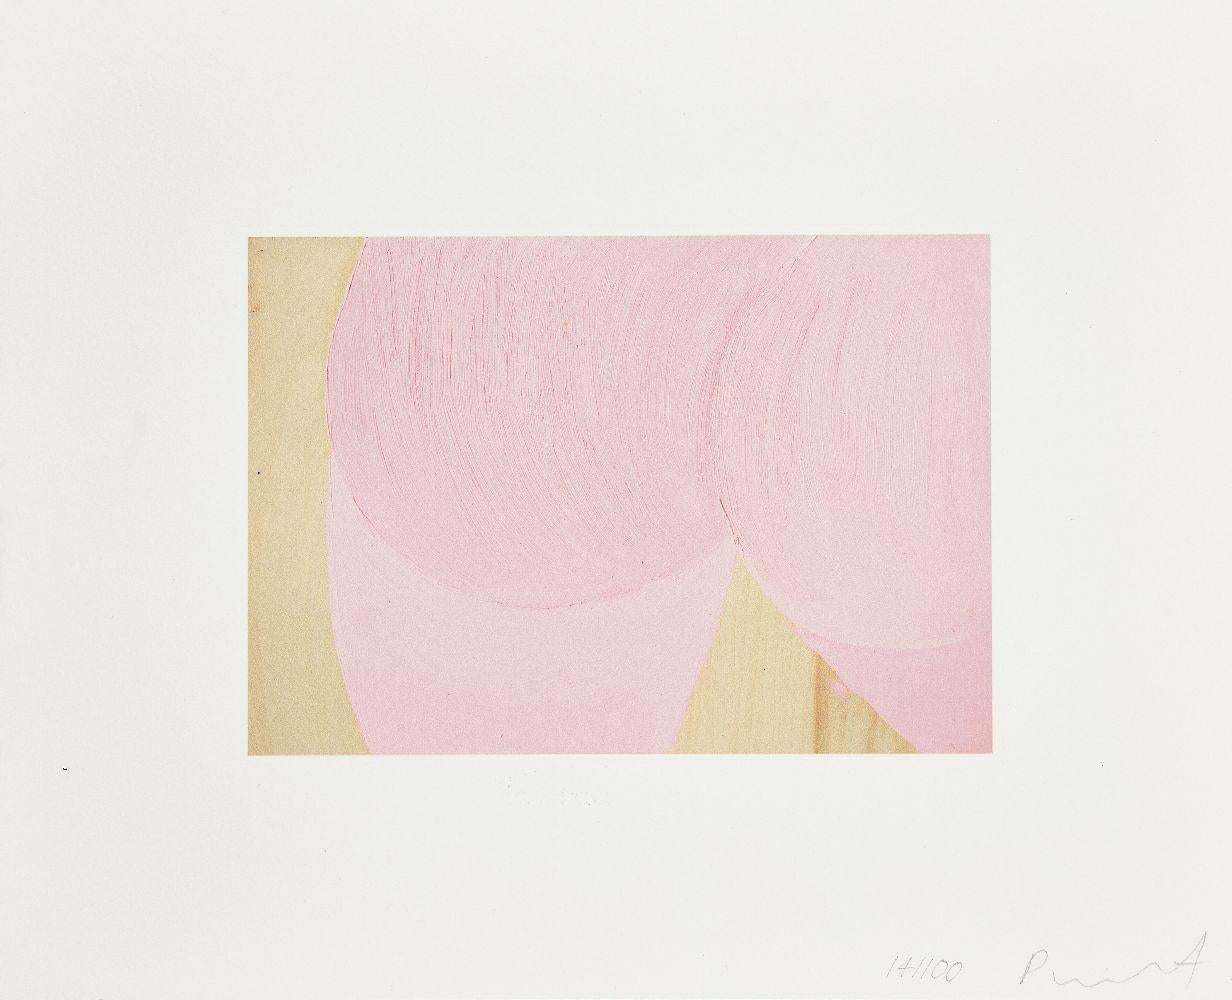 Bum Painting - Print by Laure Prouvost